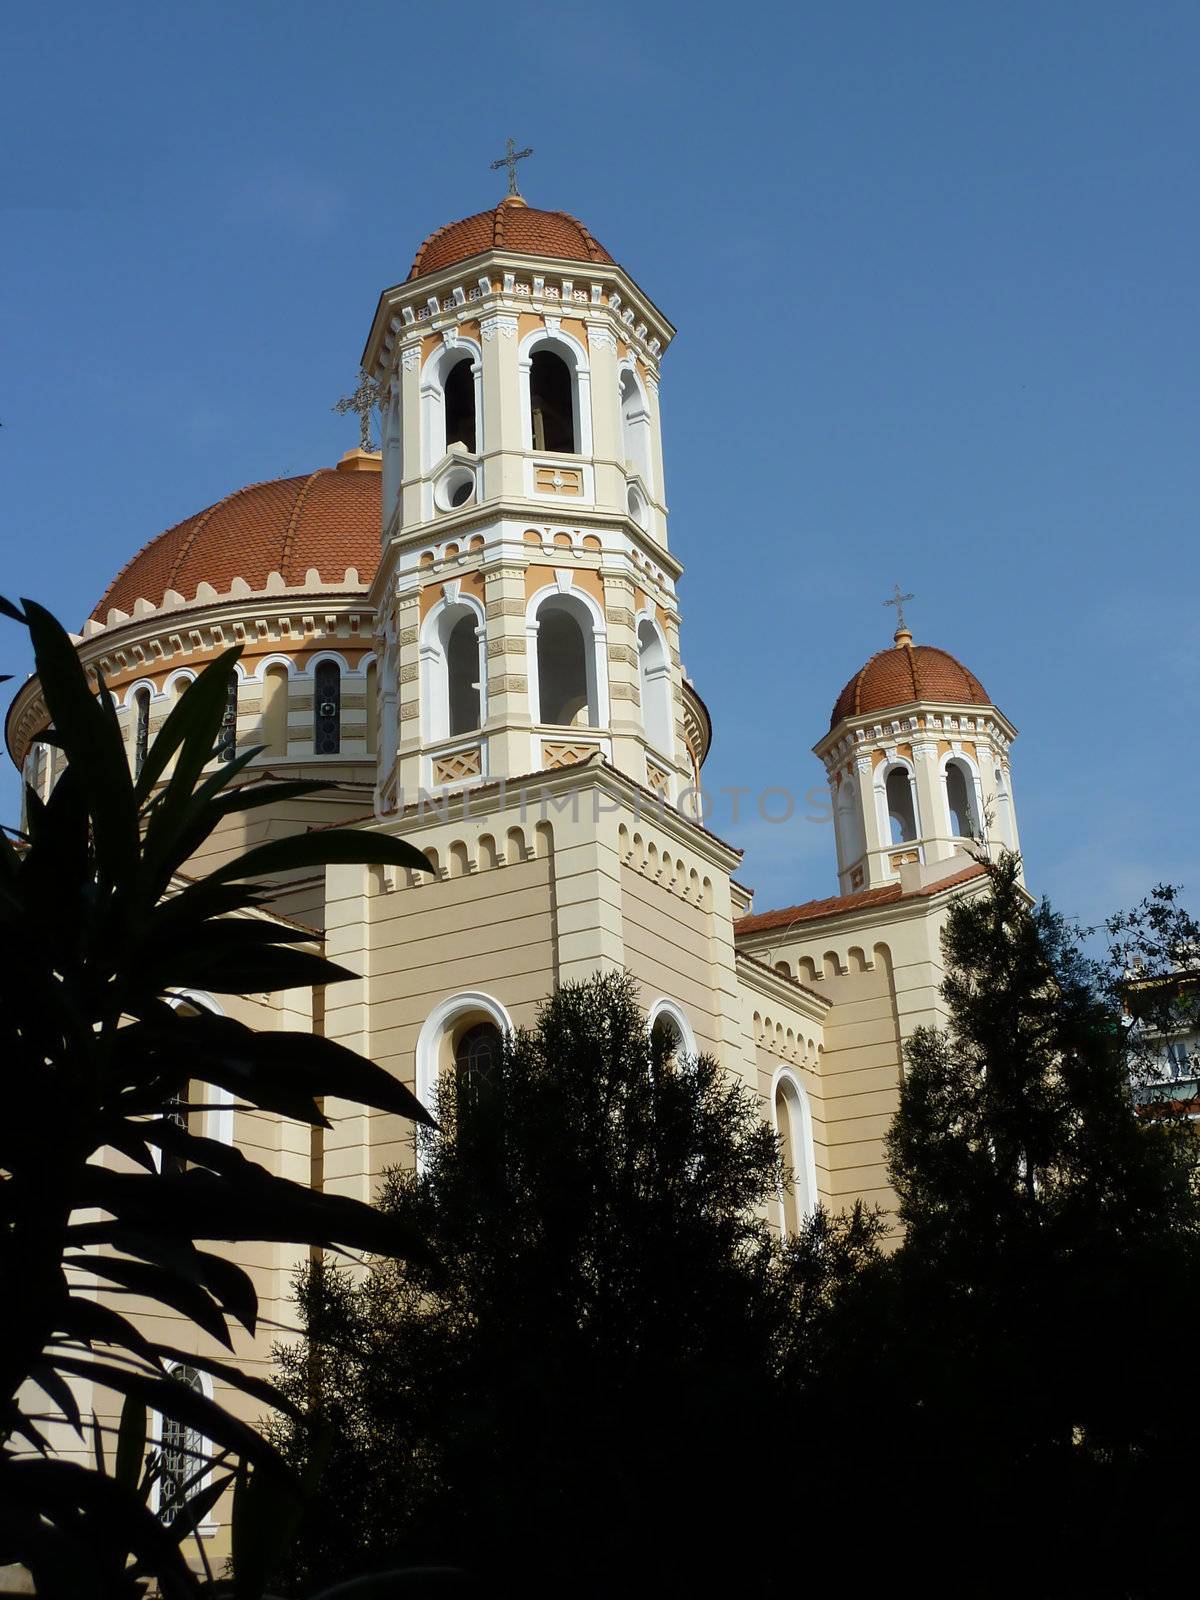 Tower of the Metropolitan Church of Thessaloniki, Greece, behind the shadow of several plants and trees